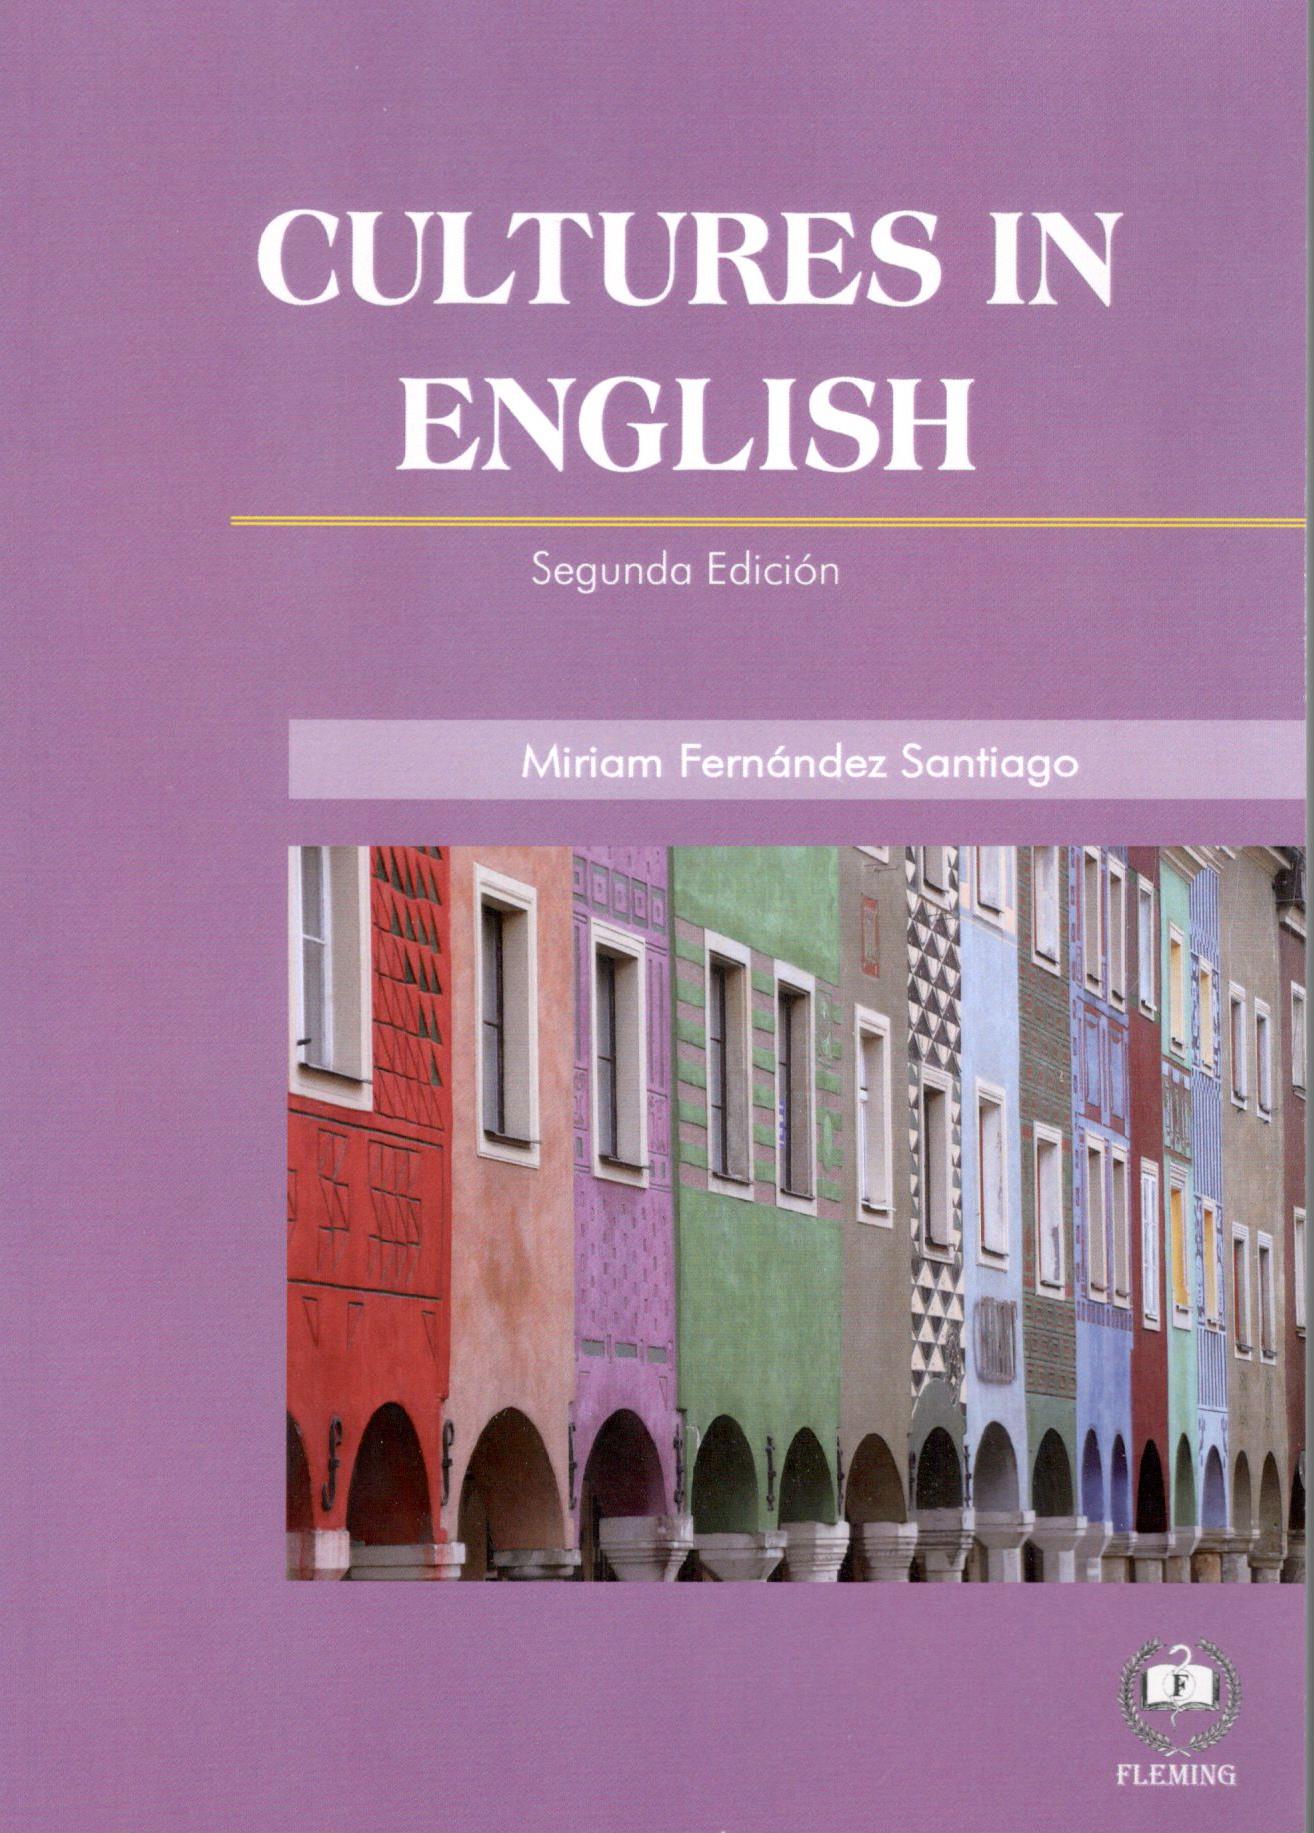 CULTURES IN ENGLISH